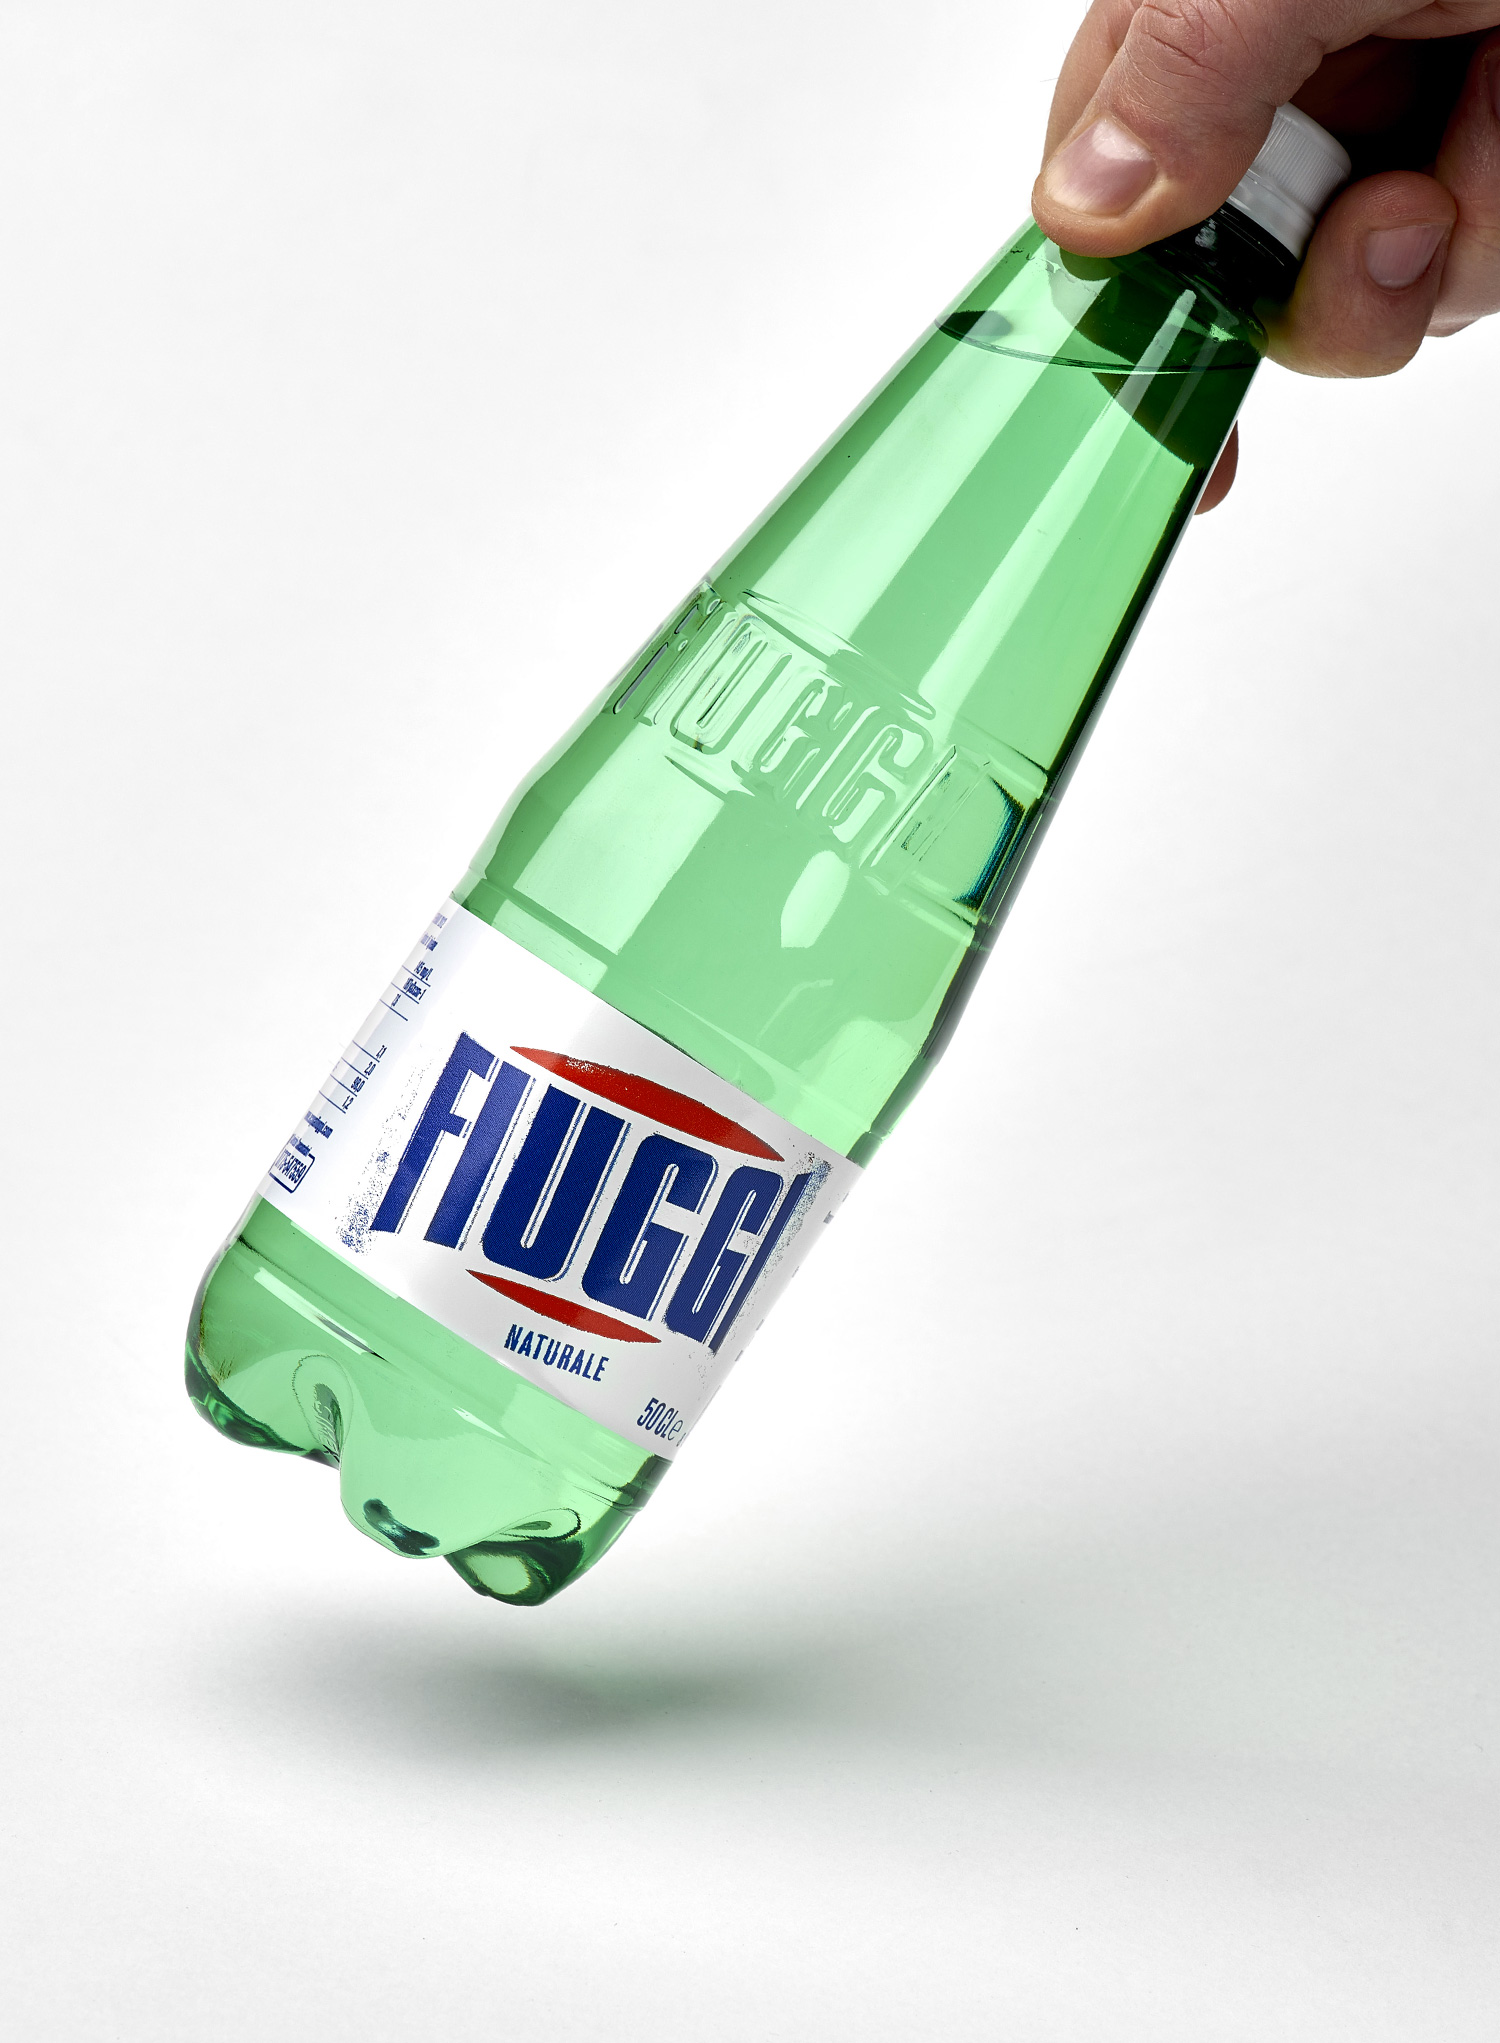 Brand and Packaging Refinement for Fiuggi Historical Italian Mineral Water